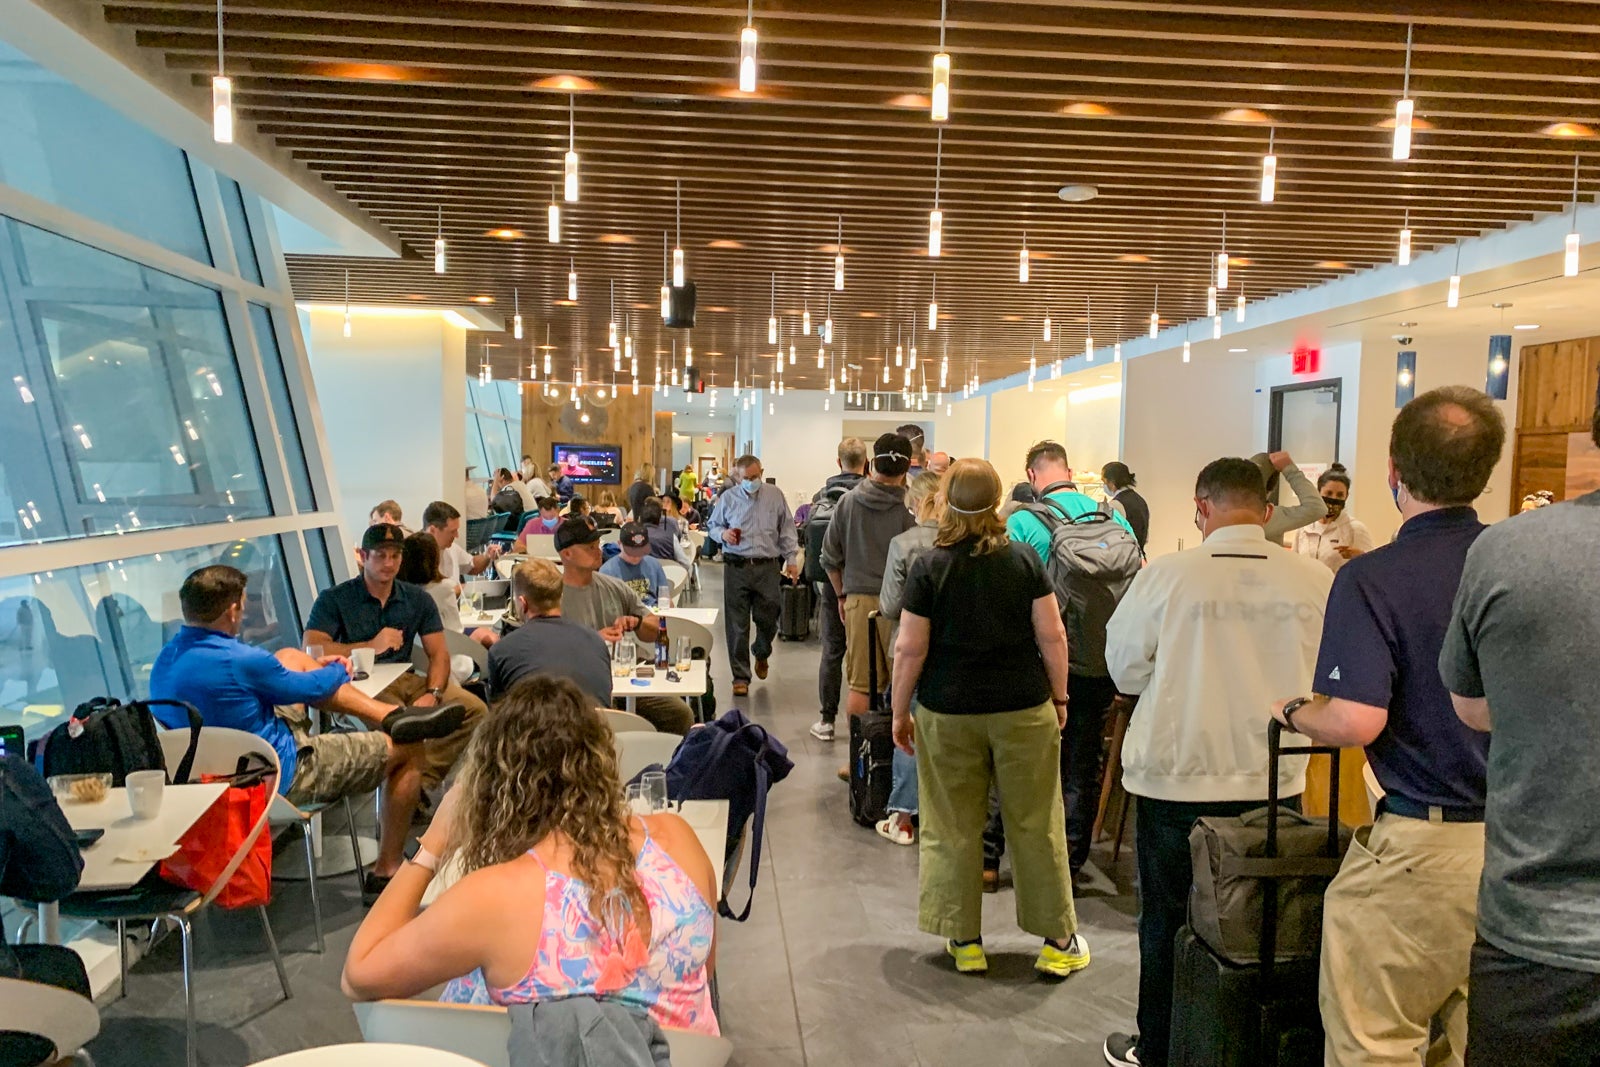 Dallas Amex Centurion Lounge long lines. (Photo by Clint Henderson/The Points Guy)